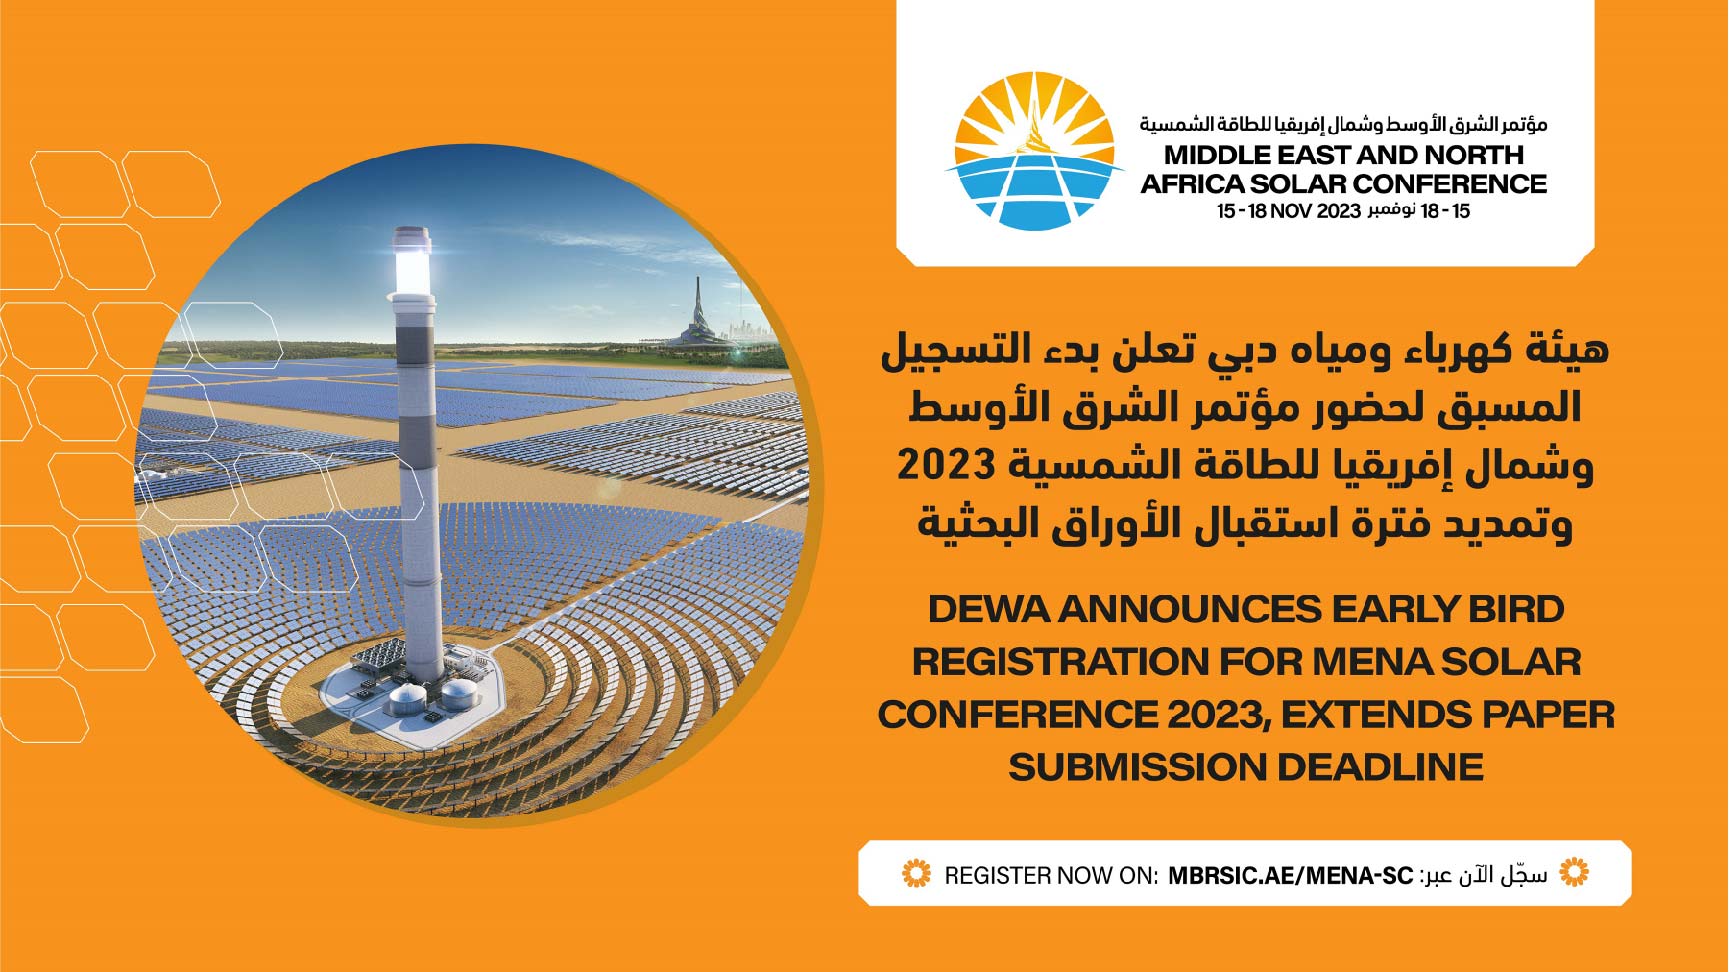 DEWA announces early bird registration for MENA Solar Conference 2023, extends paper submission deadline